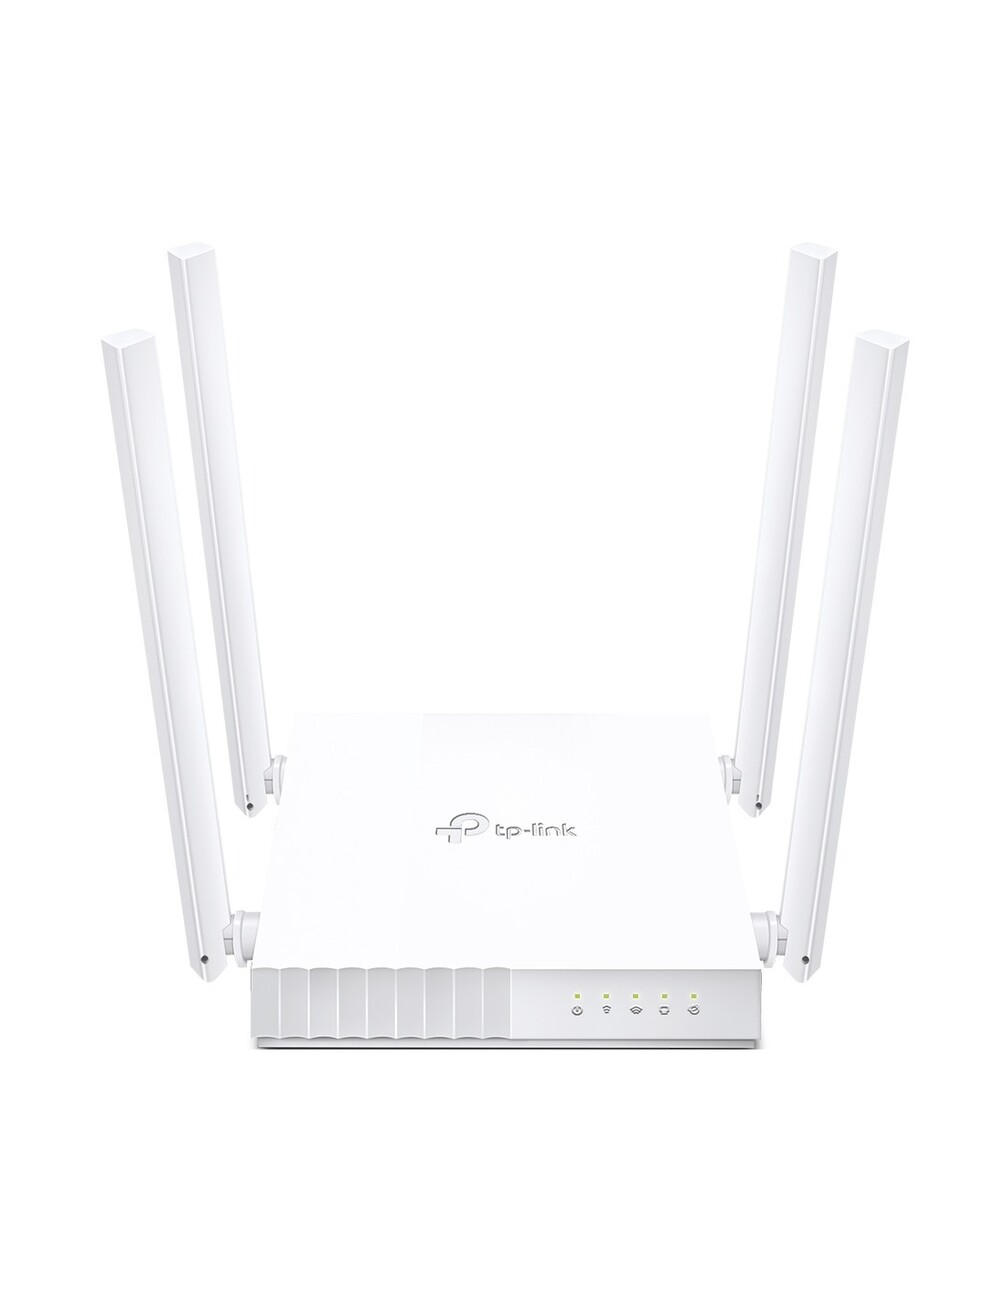 AC750 DUAL BAND WI-FI ROUTER, 300 MBPS